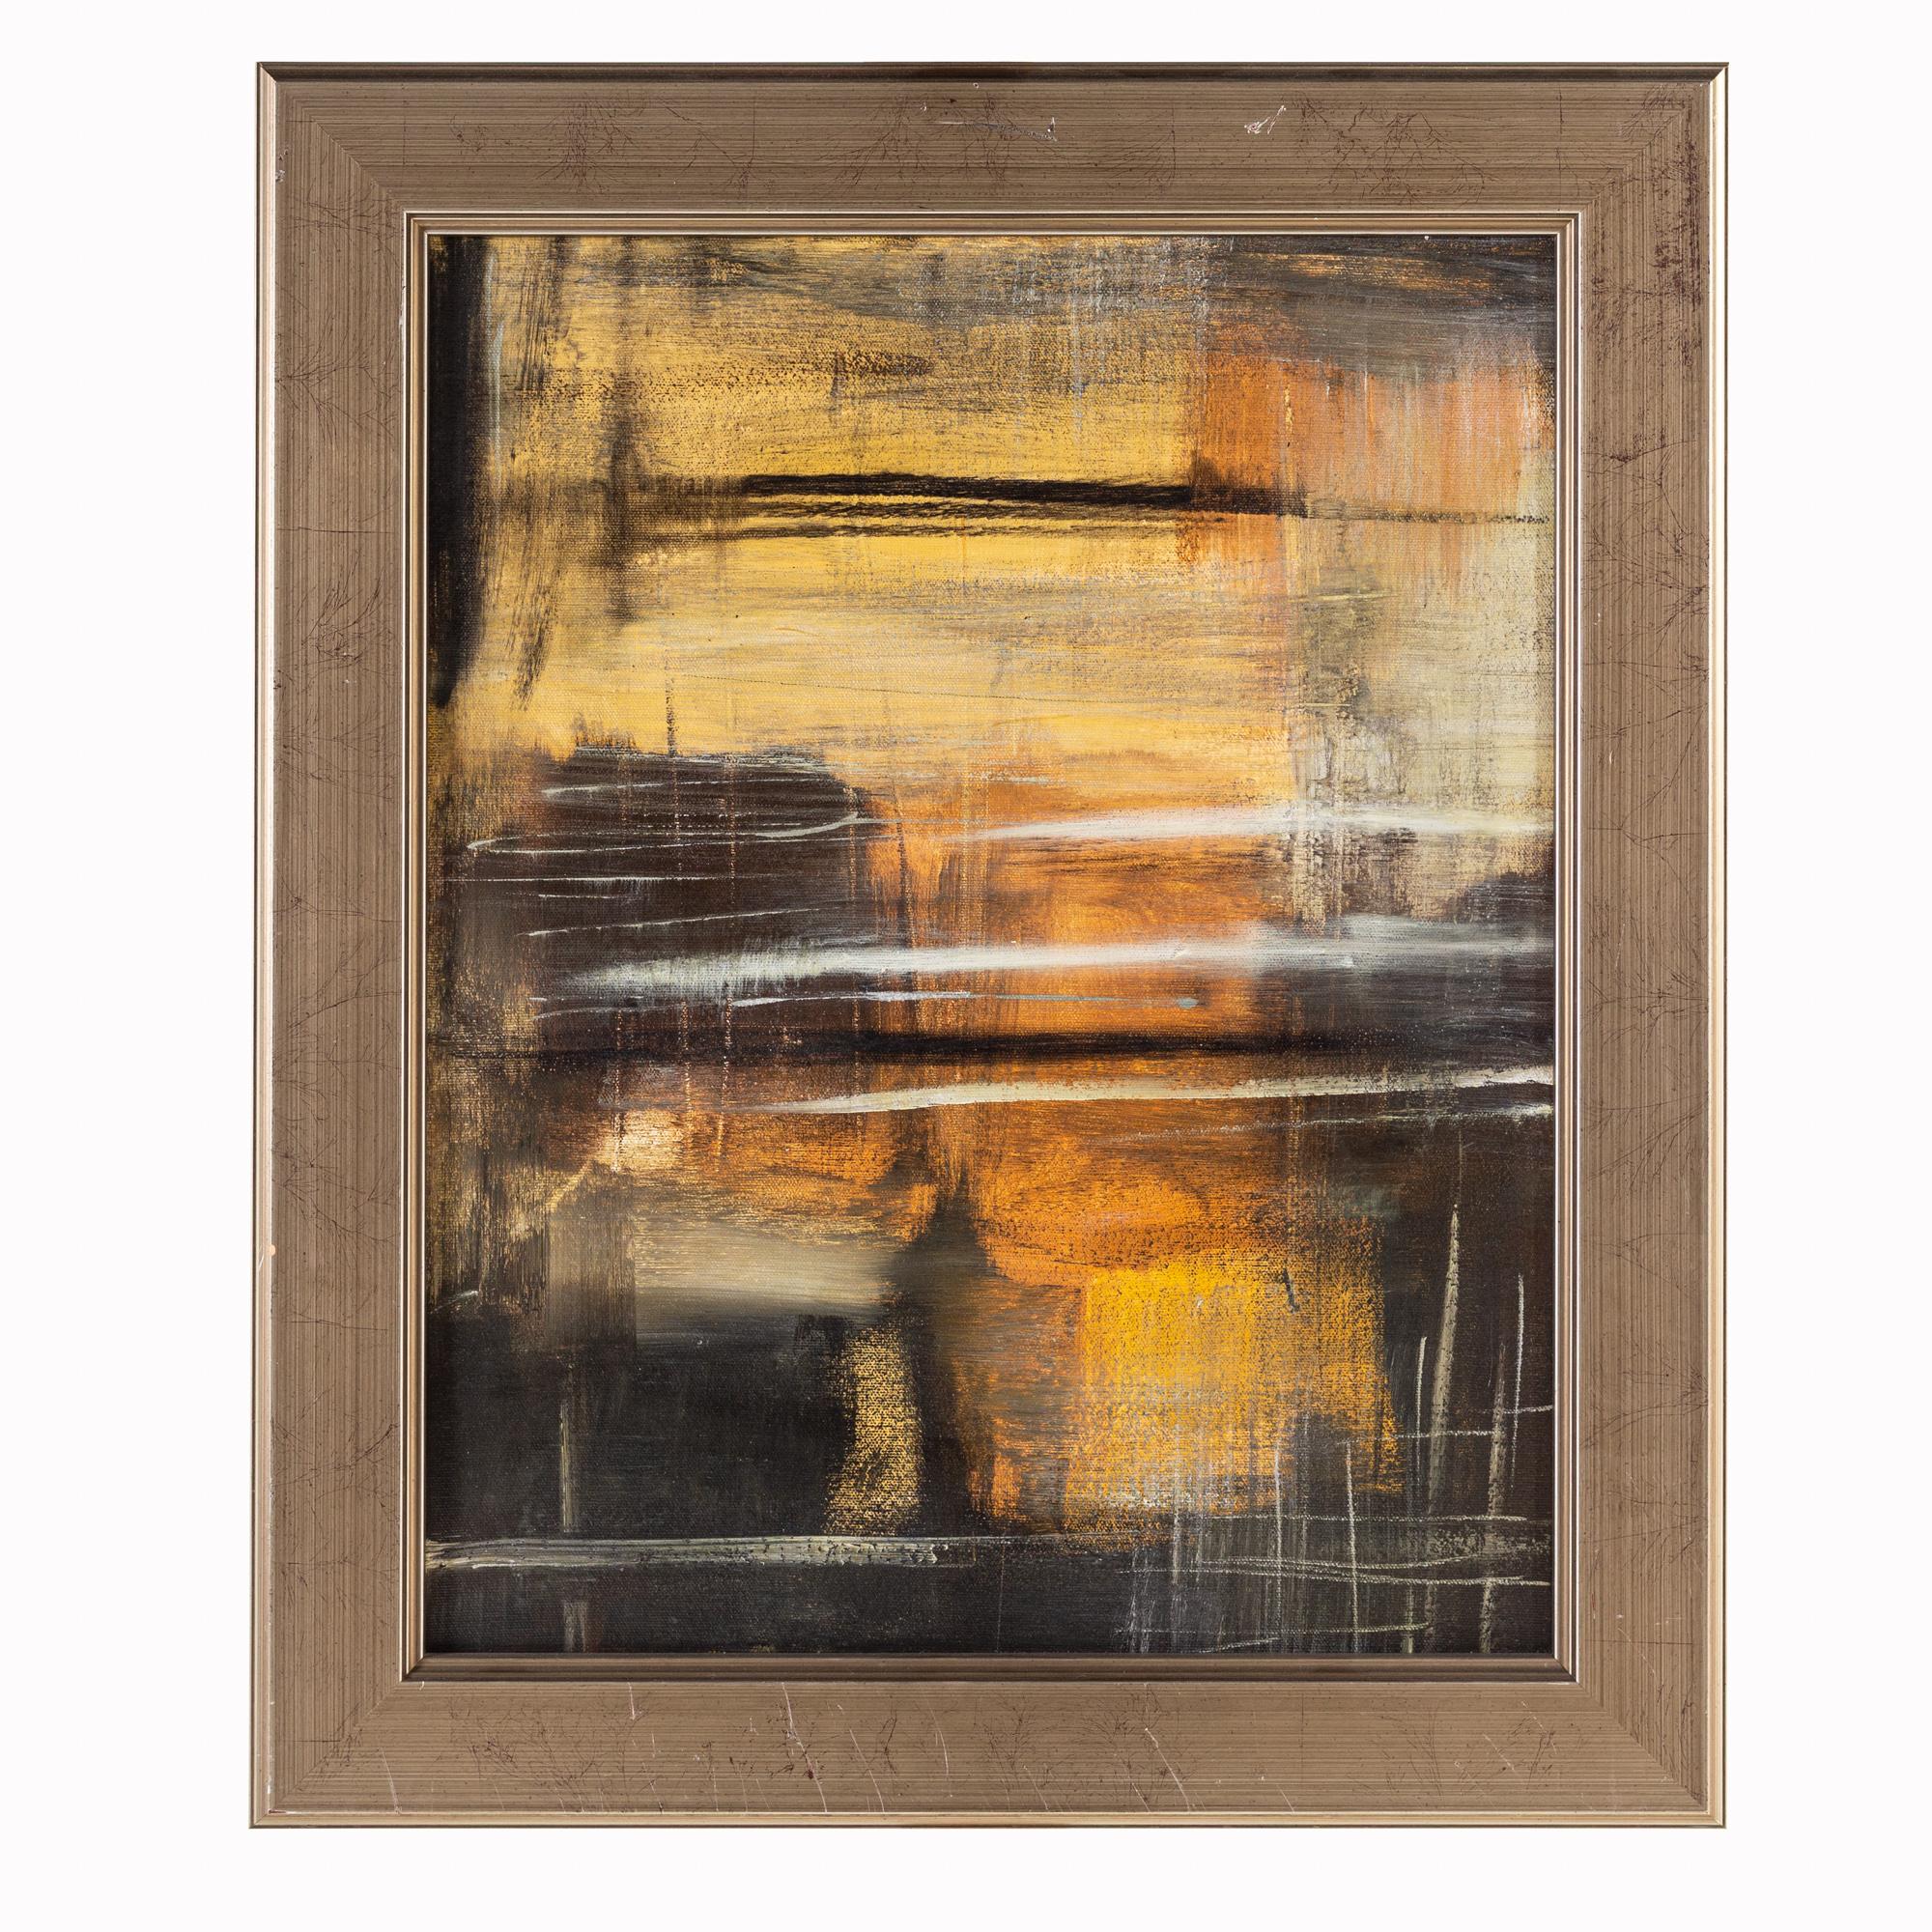 Pulliam abstract framed oil painting on canvas

This painting measures: 20 wide x 2 deep x 24 inches high

This painting is in great vintage condition with minor marks, dents, and wear.

We take our photos in a controlled lighting studio to